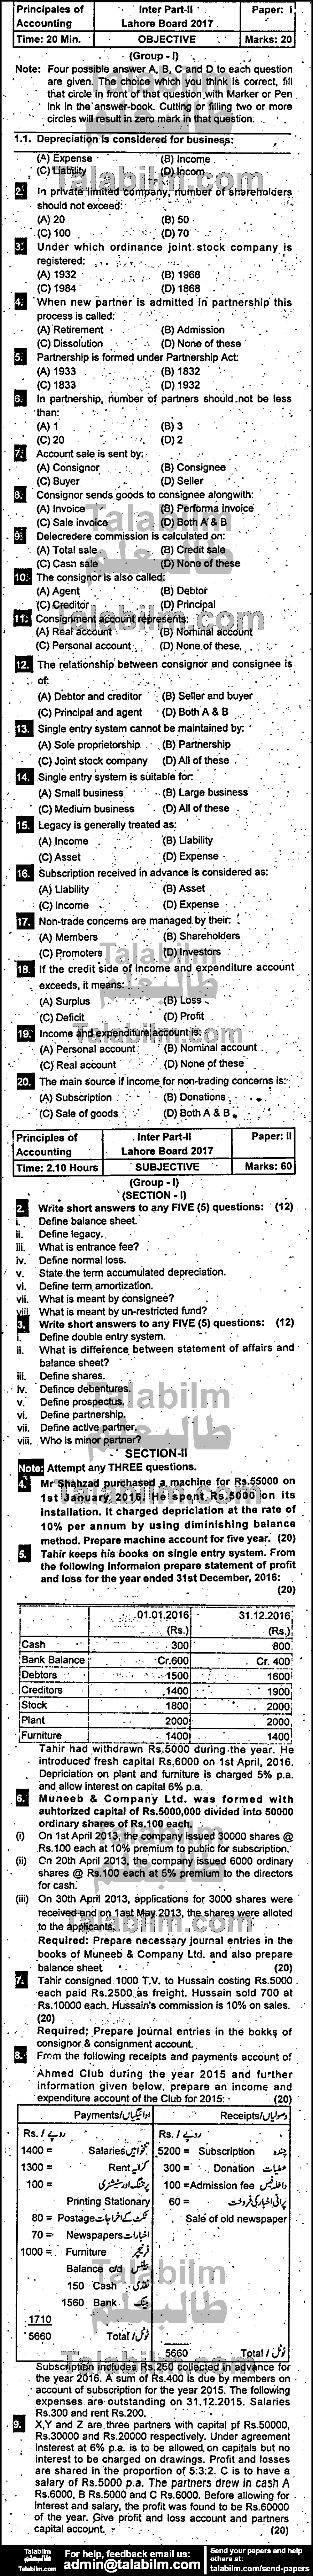 Principles Of Accounting 0 past paper for Group-I 2017